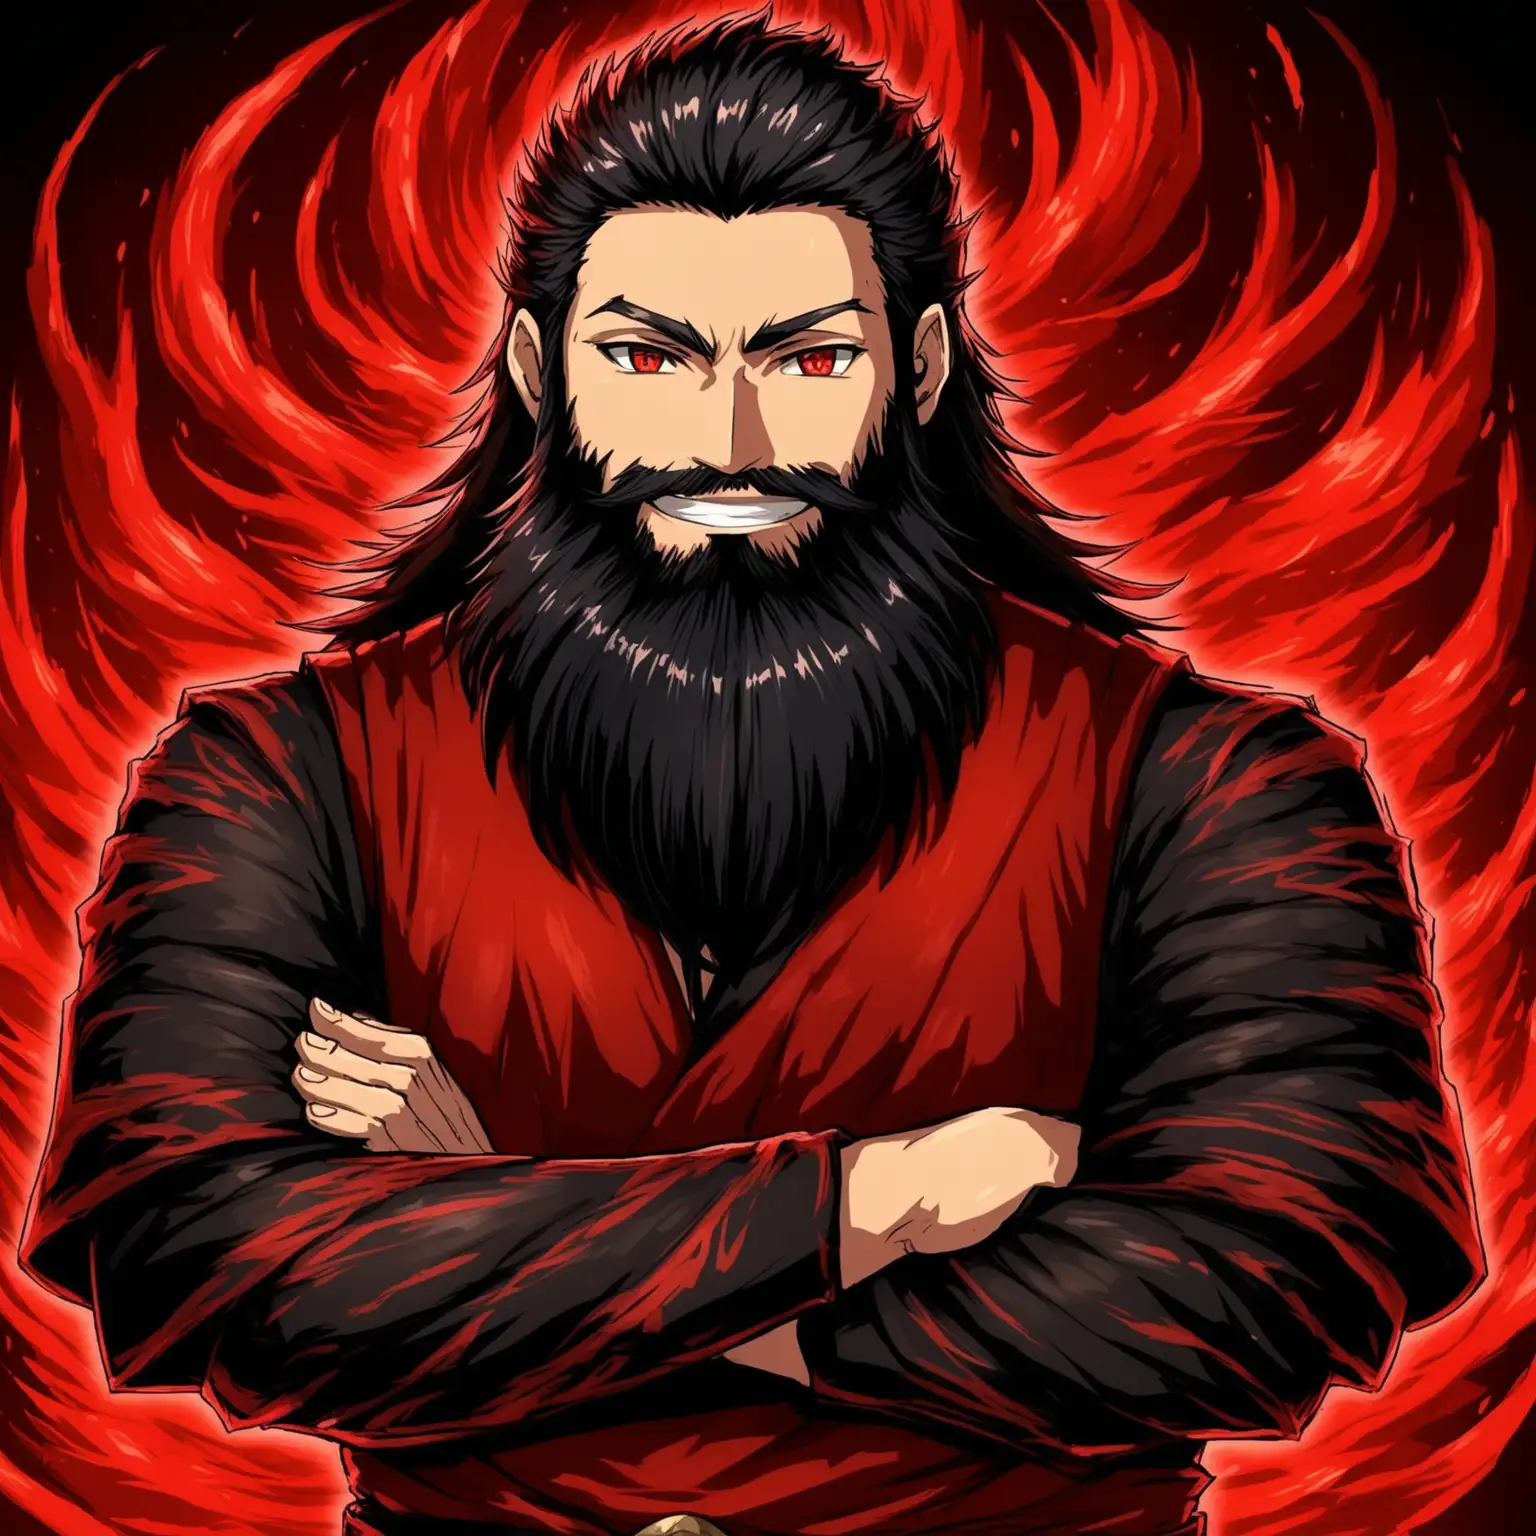 Smiling Anime Guy Dwarf with Red Aura and Crossed Arms